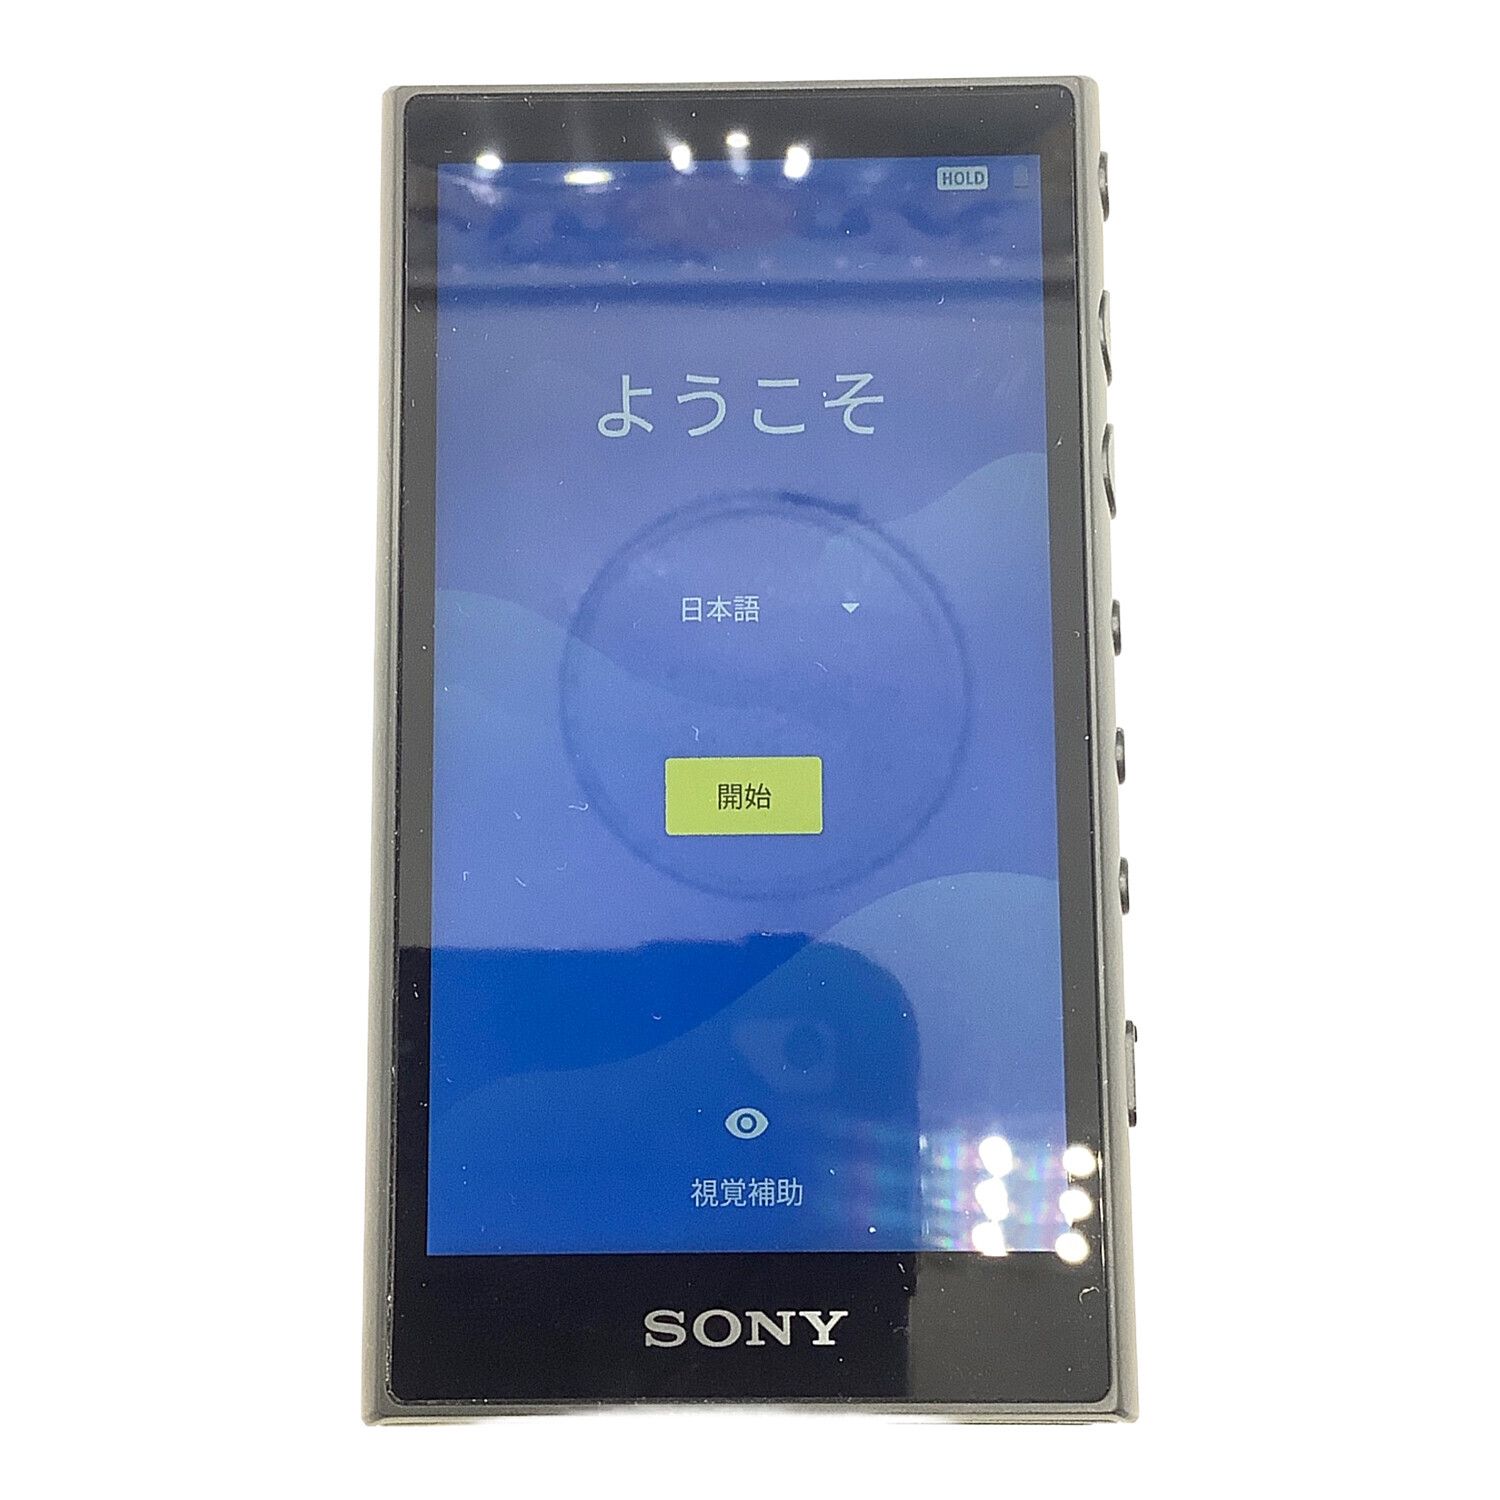 SONY (ソニー) WALKMAN ハイレゾ対応 64GB Android9.0 NW-A107